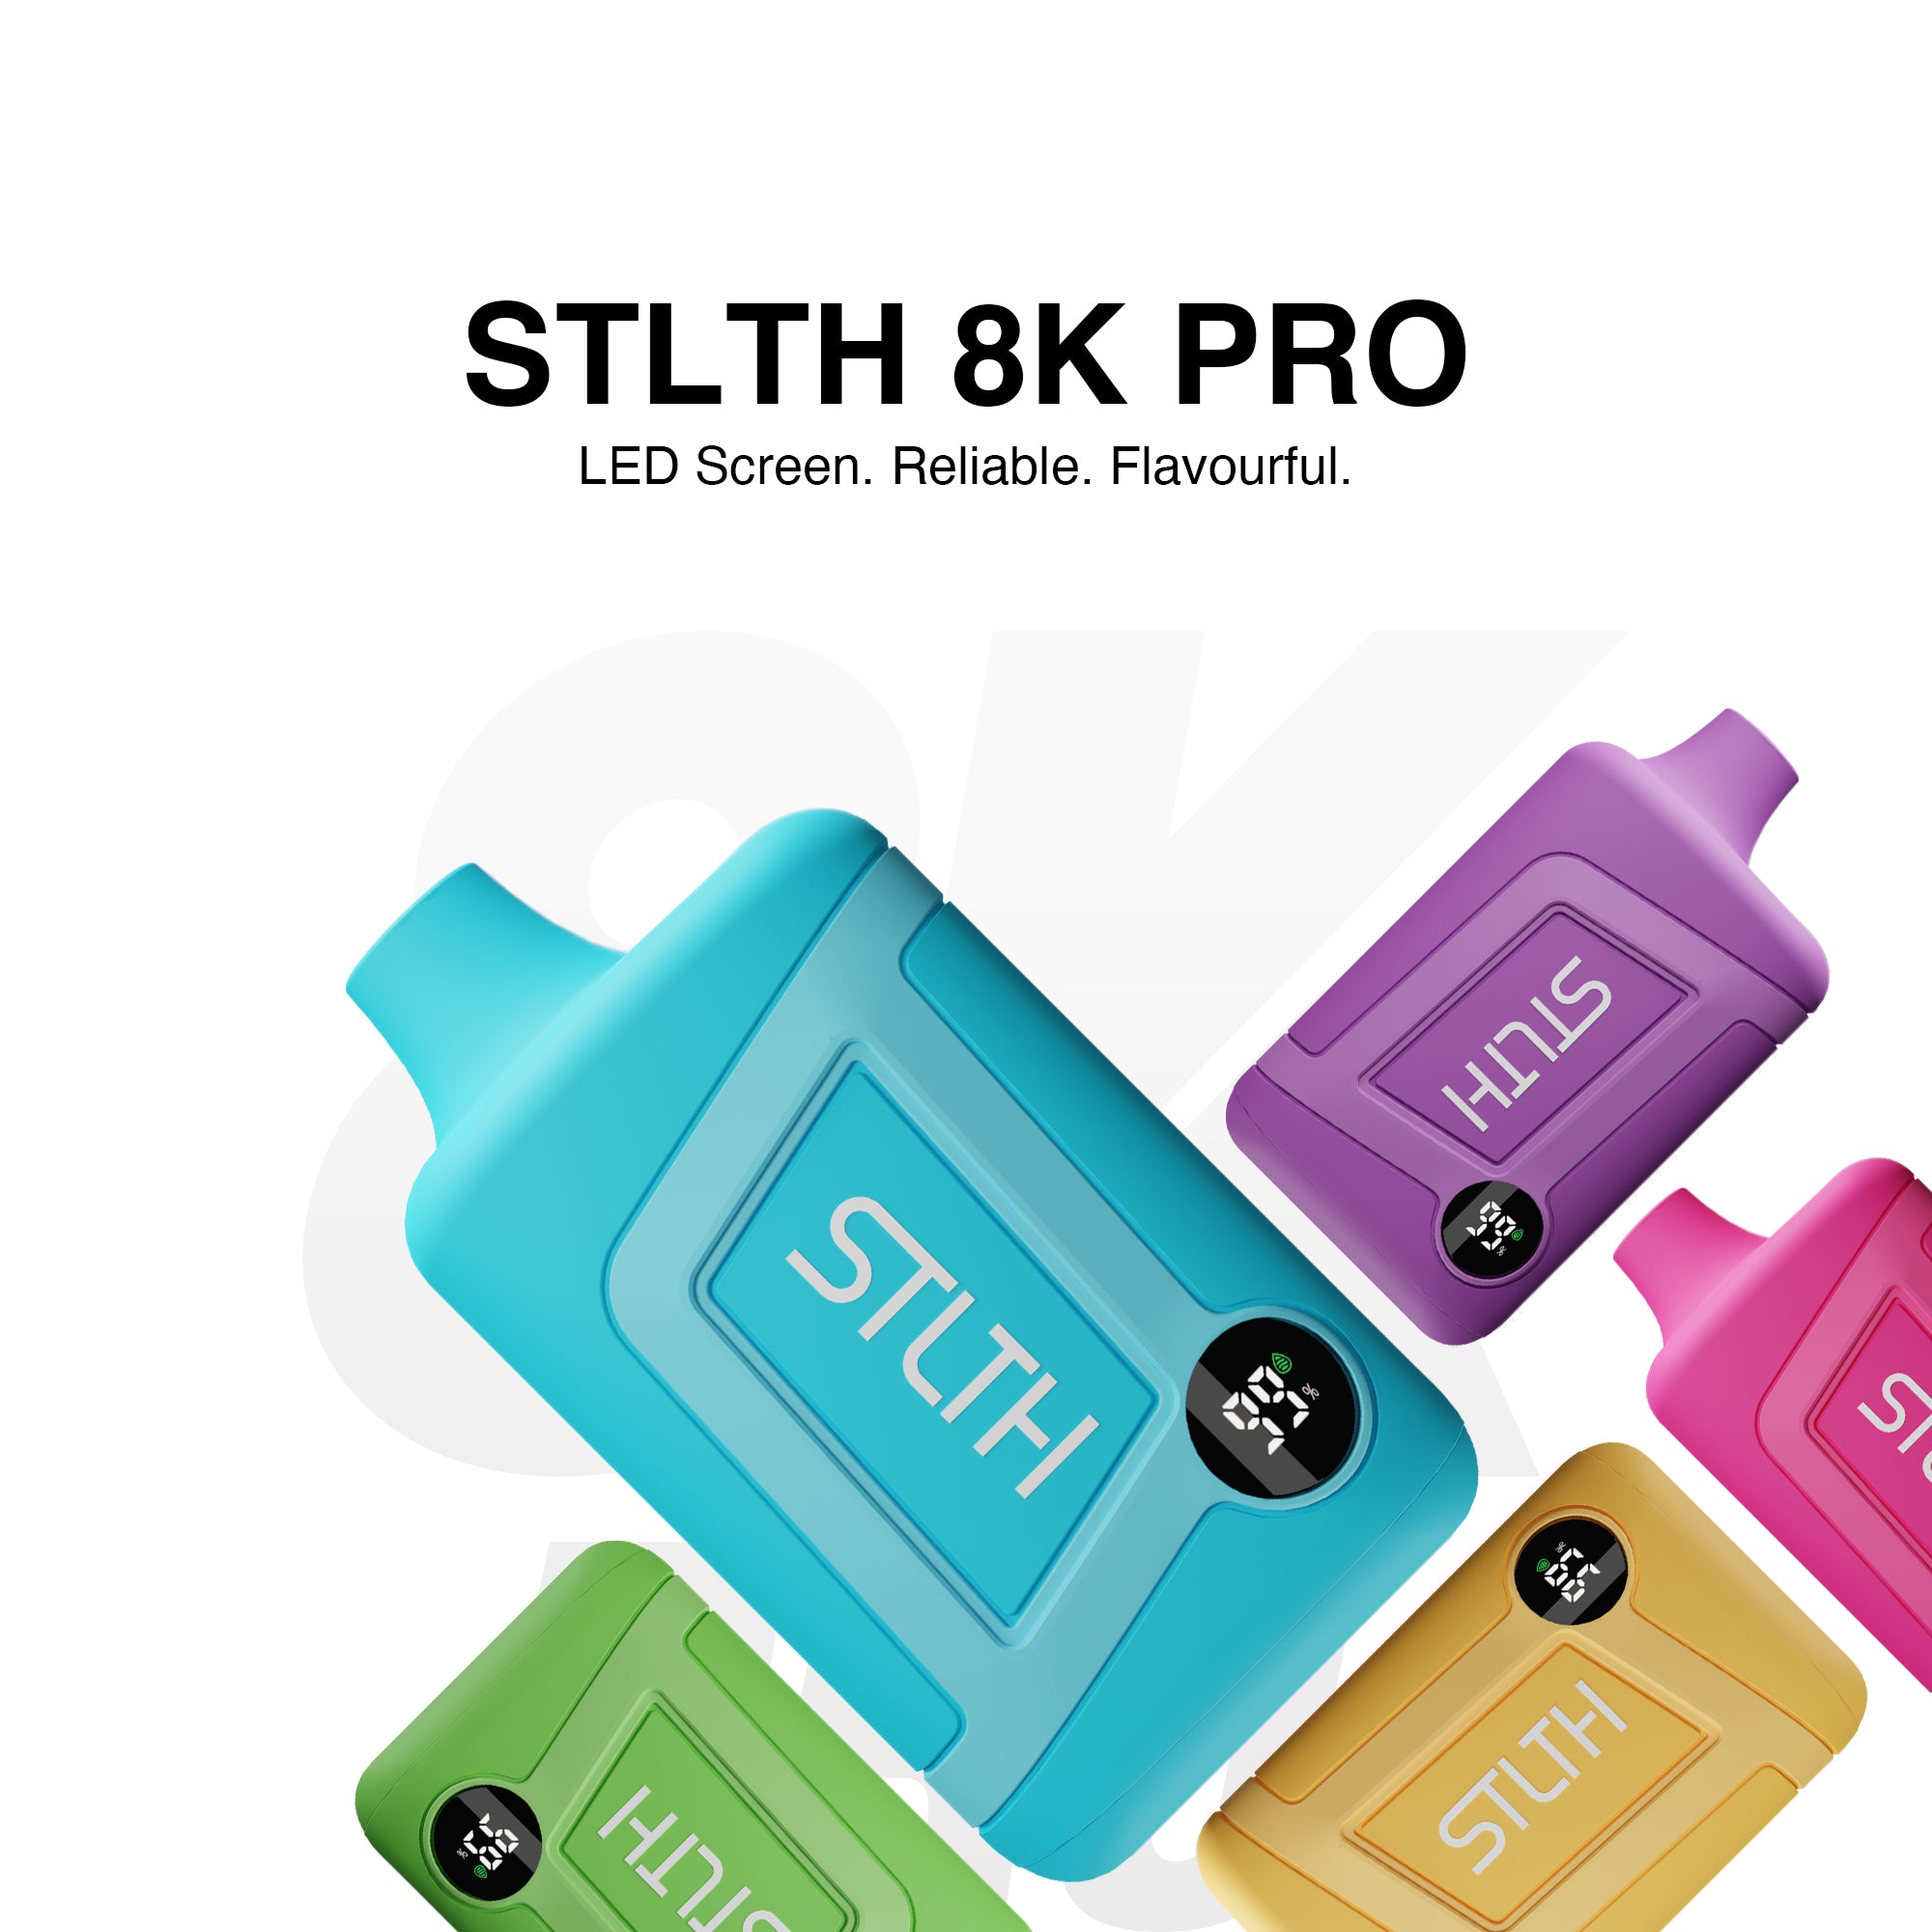 STLTH 8K PRO: LED Screen. Reliable. Flavourful.